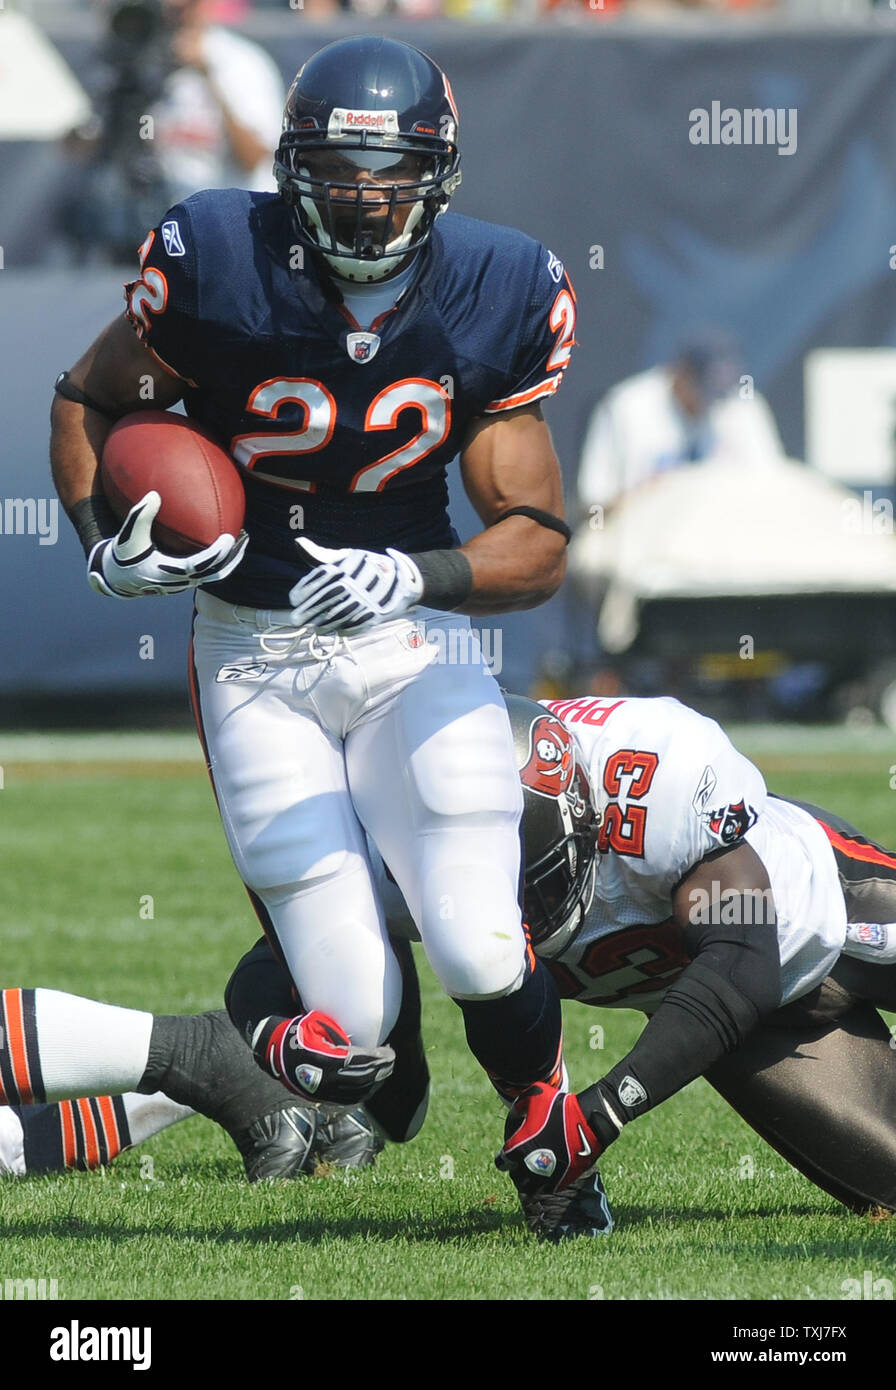 Chicago Bears running back Matt Forte runs for a 4 yard gain as Tampa Bay Buccaneers defender Nick Roach makes the tackle during the first quarter at Soldier Field in Chicago on September 21, 2008. (UPI Photo/David Banks) Stock Photo